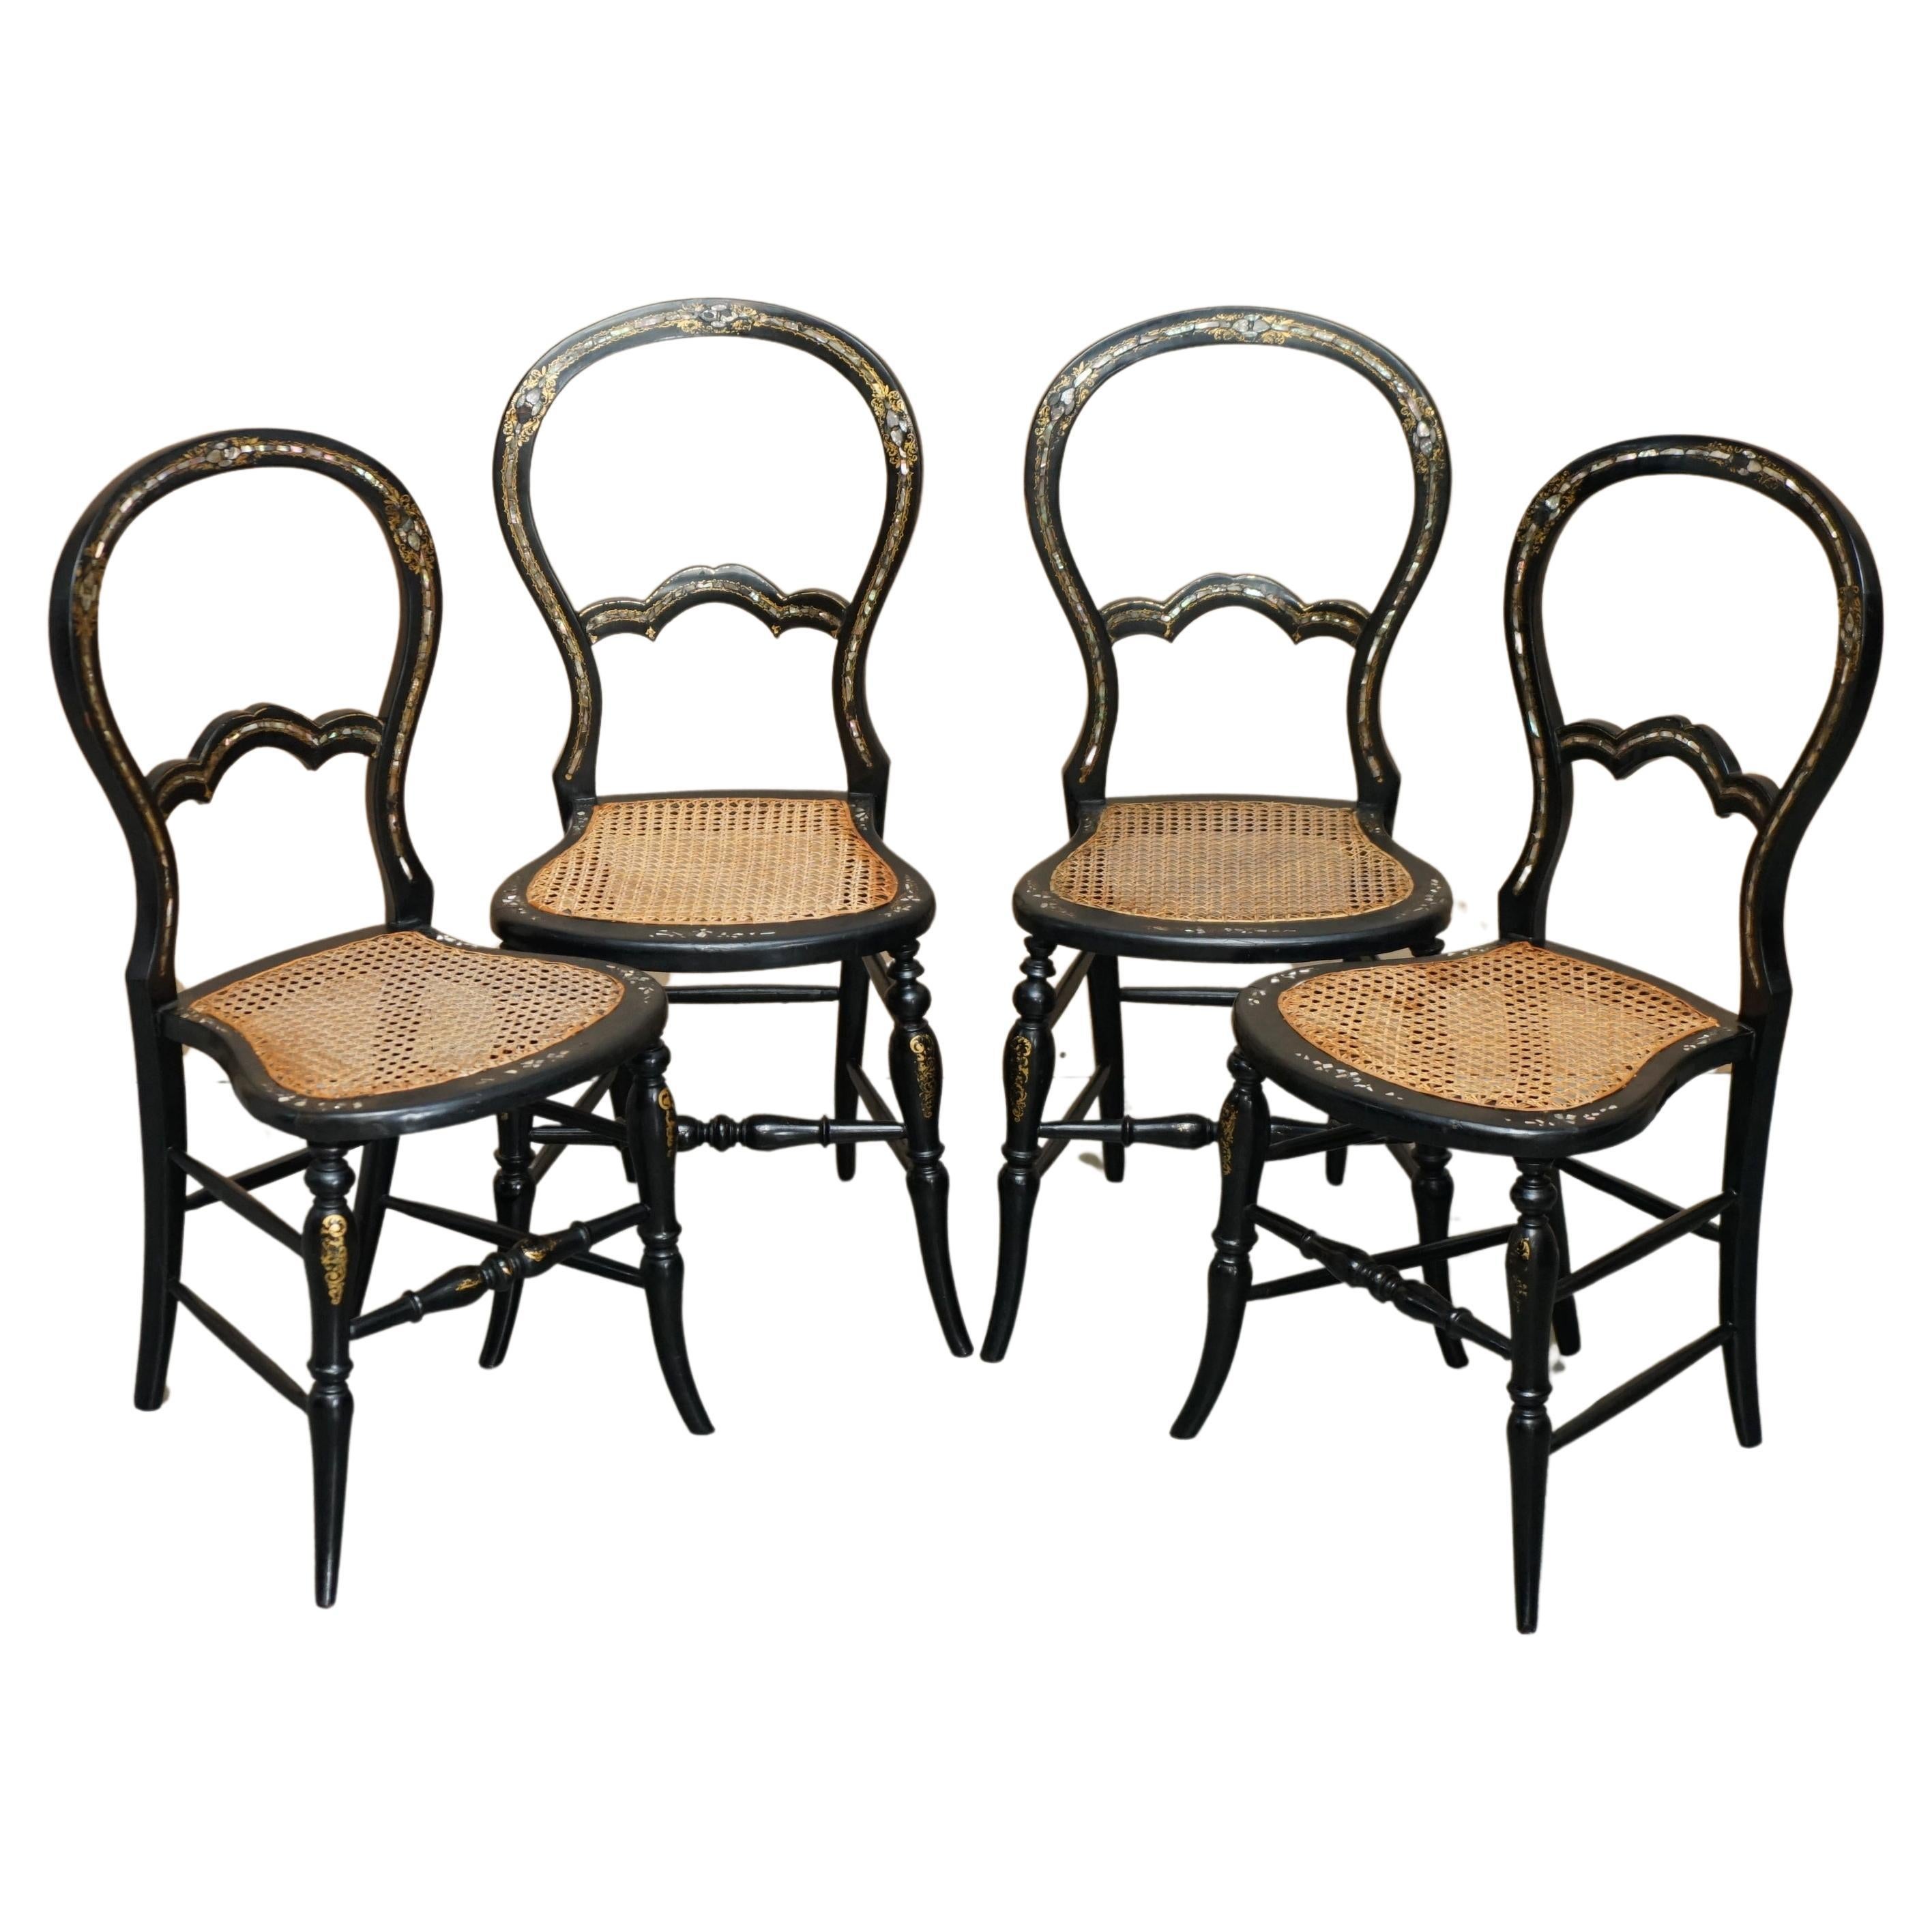 FOUR FINE AND ANTIQUE REGENCY BERGERE MOTHER OF PEARL EBONISED SIDE CHAIRs